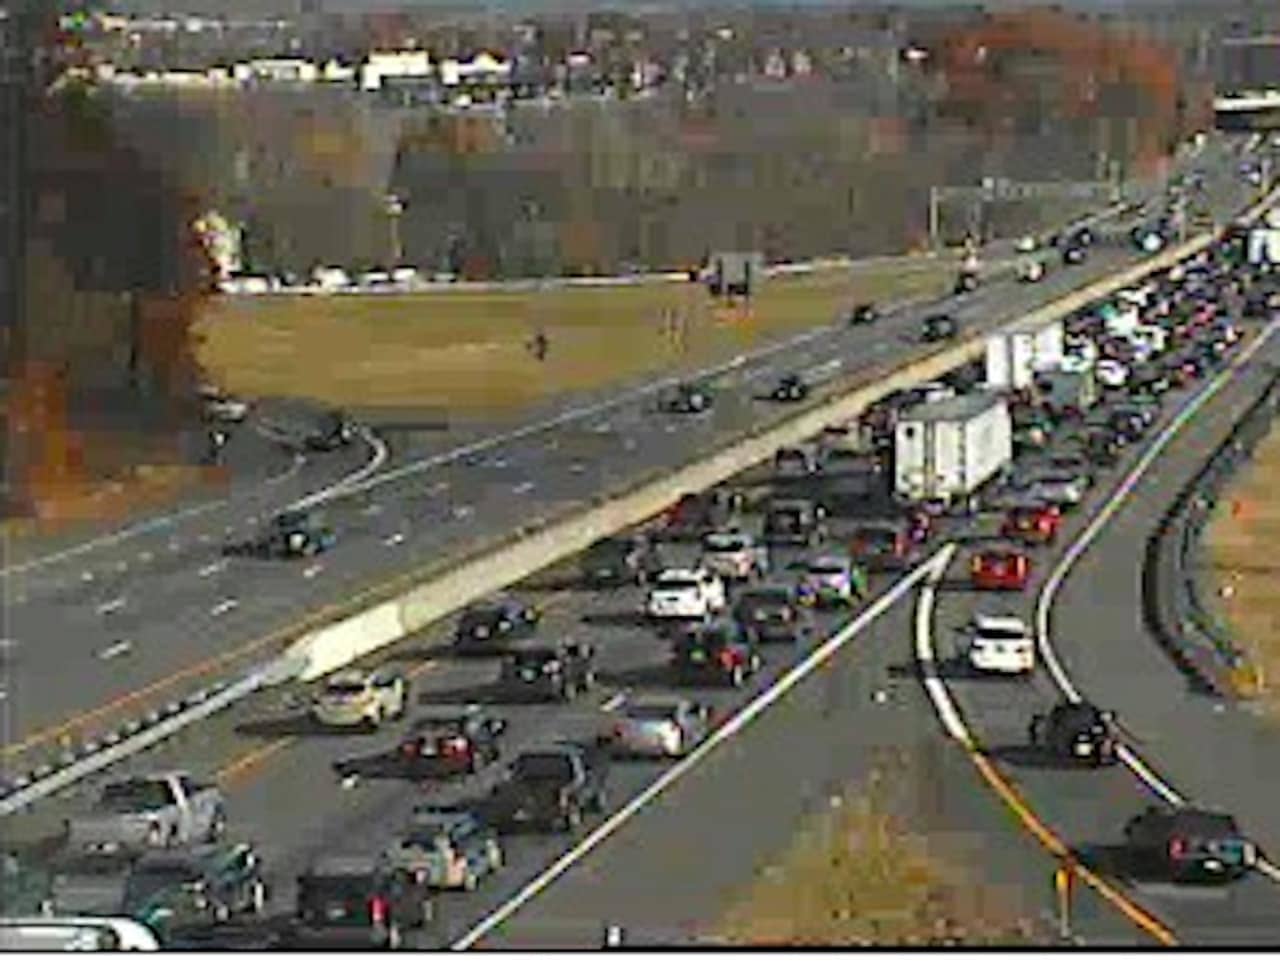 A look at the heavy delays Sunday afternoon on I-87 in Rockland near the Garden State Parkway connector (Exit 14A).